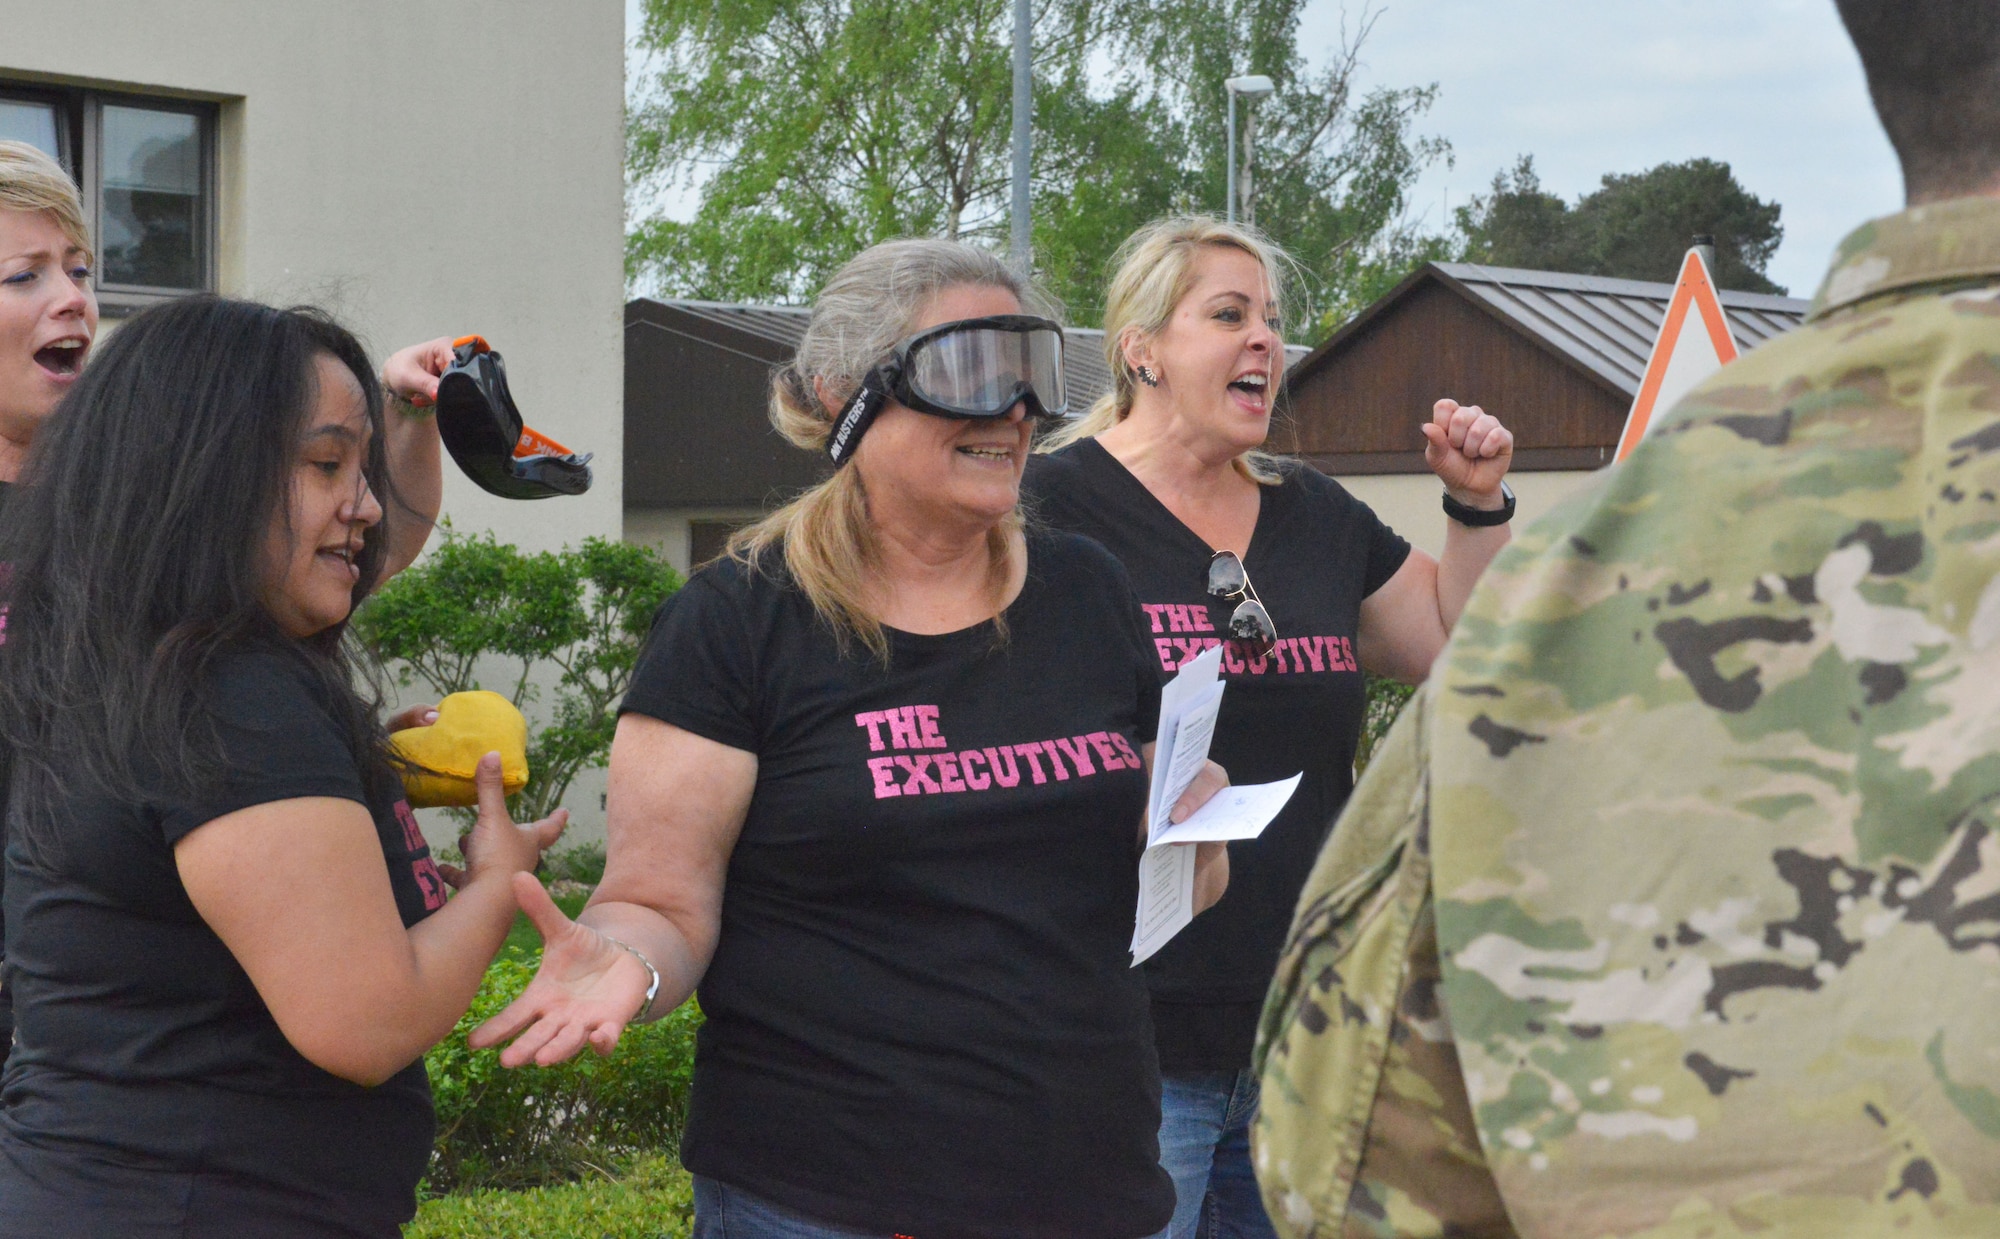 Spouses compete in drunk goggle corn hole during the Amazing Base event on Ramstein Air Base, Germany, Tuesday, April 24, 2018. The purpose of the event was to bring newcomers together to promote camaraderie.